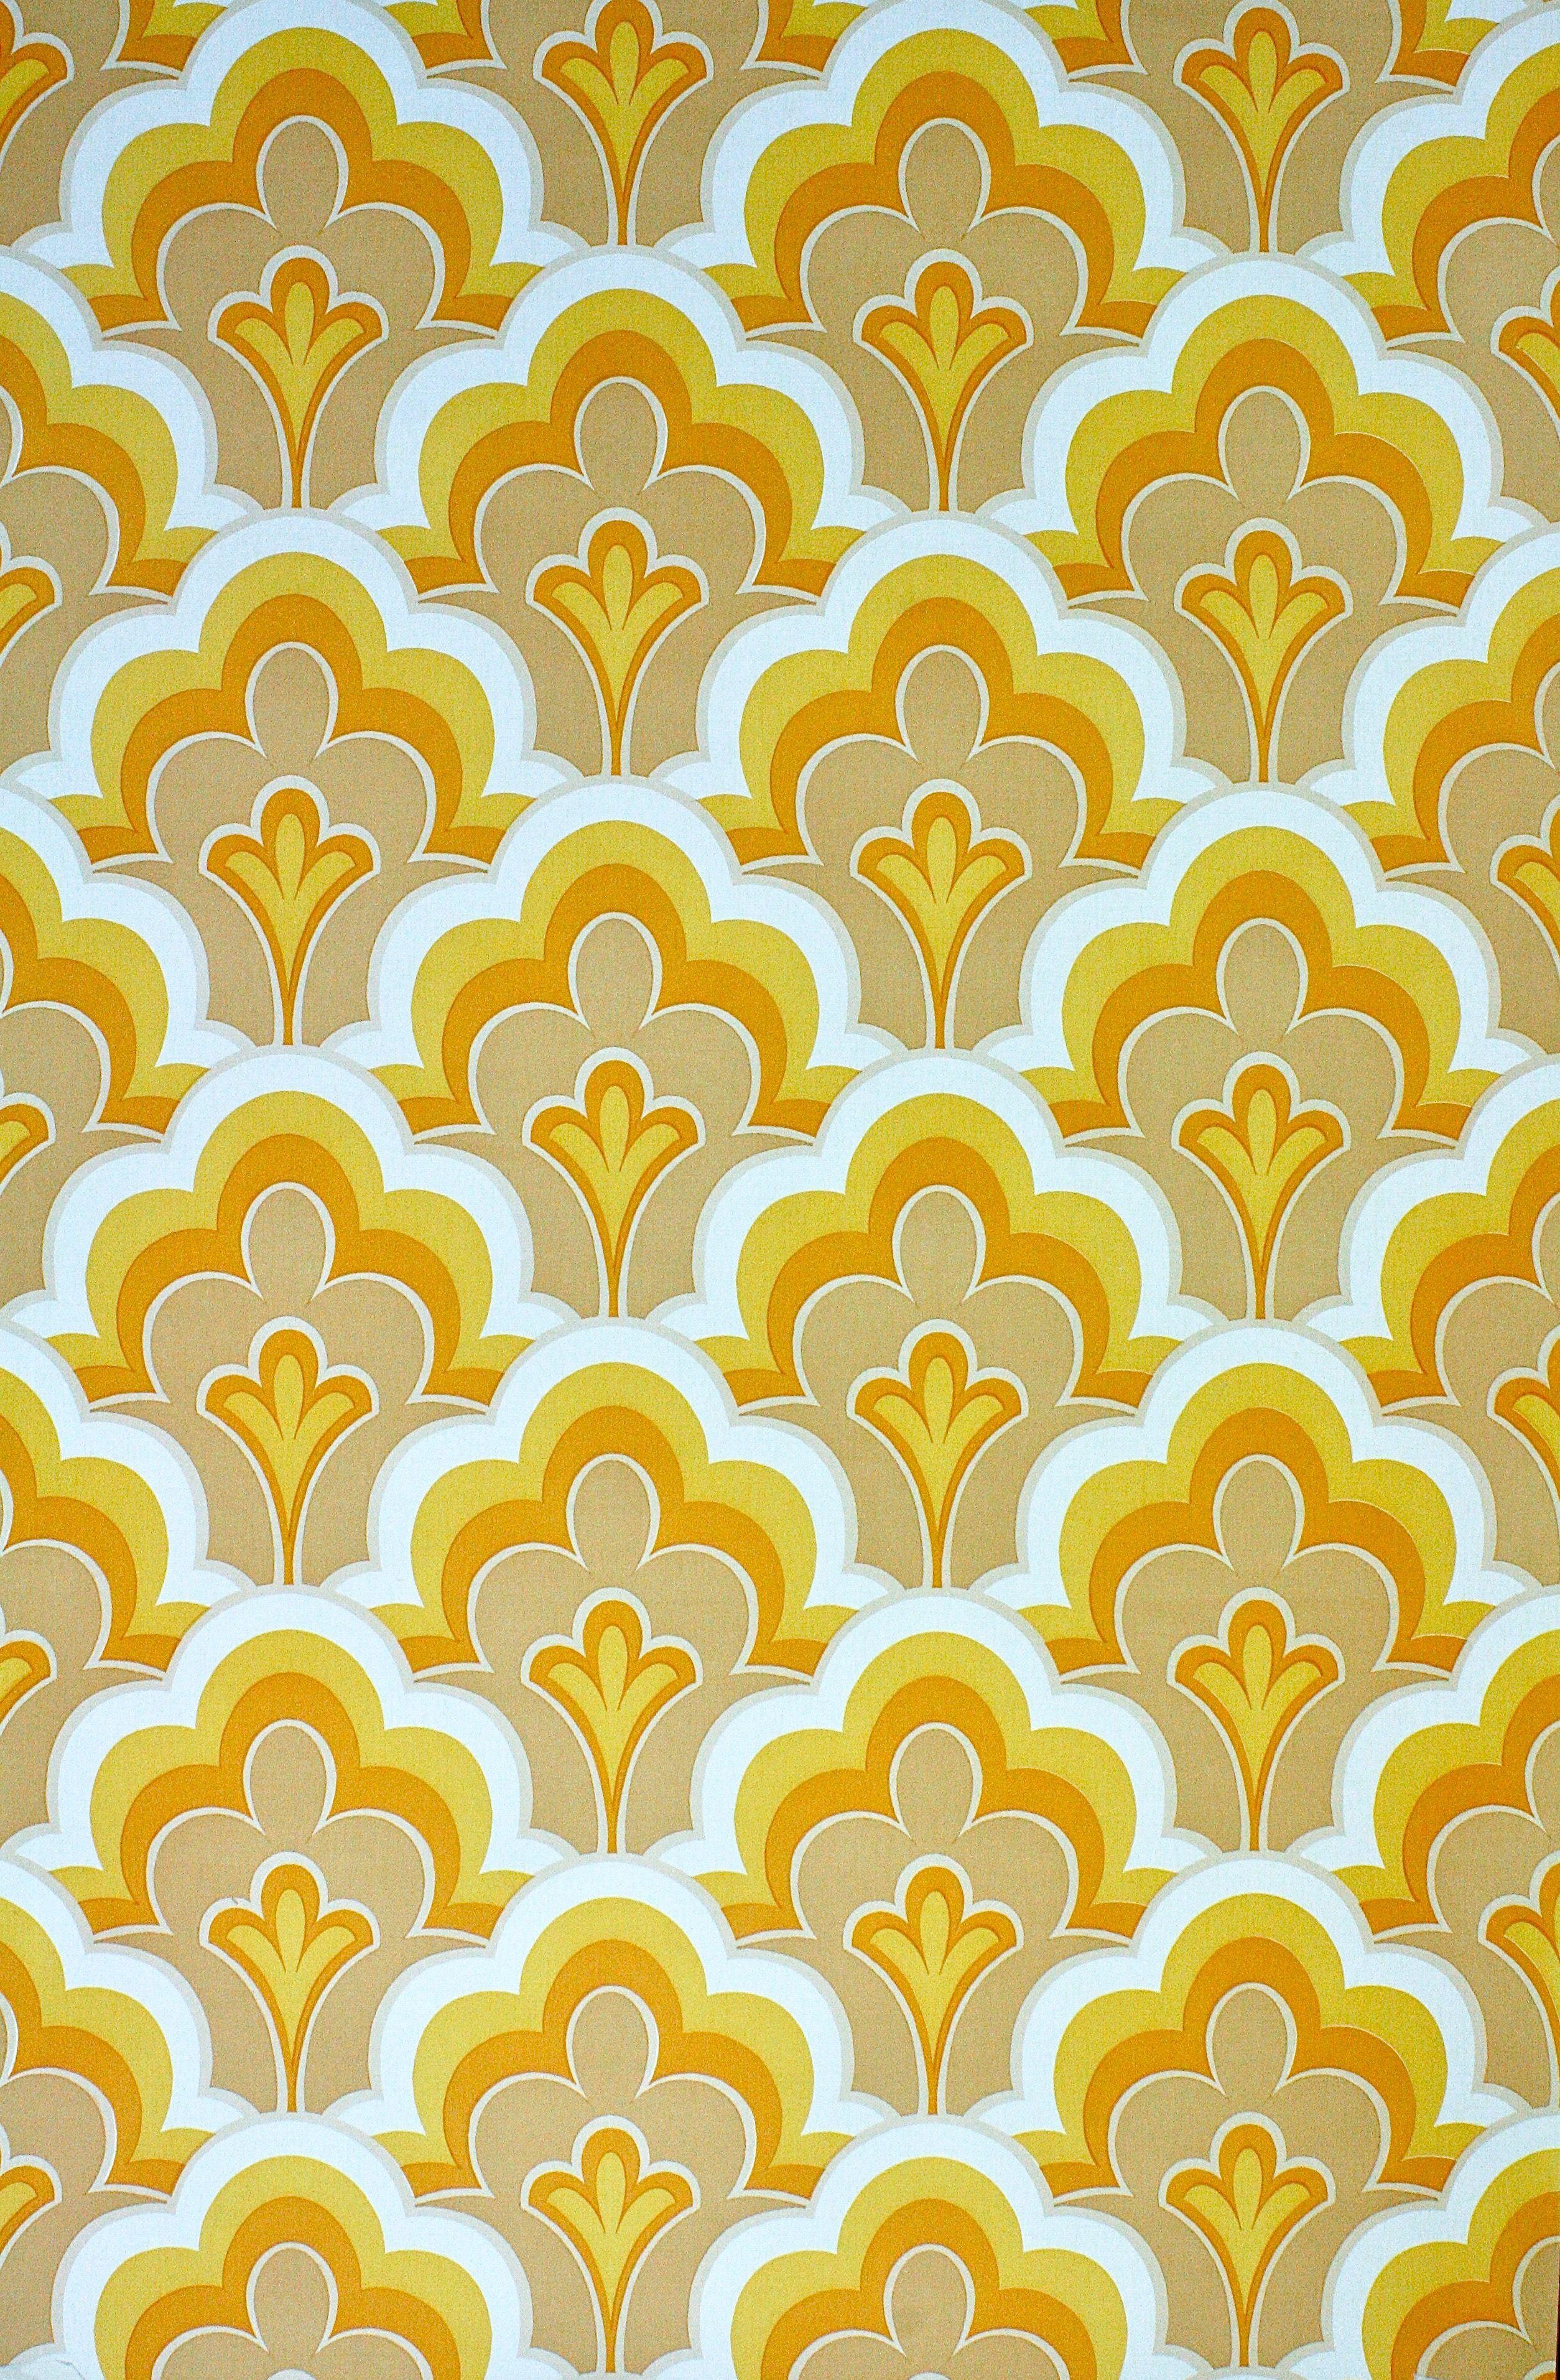 Sixties Wallpapers - Wallpaper Cave Vintage Swirl Patterns